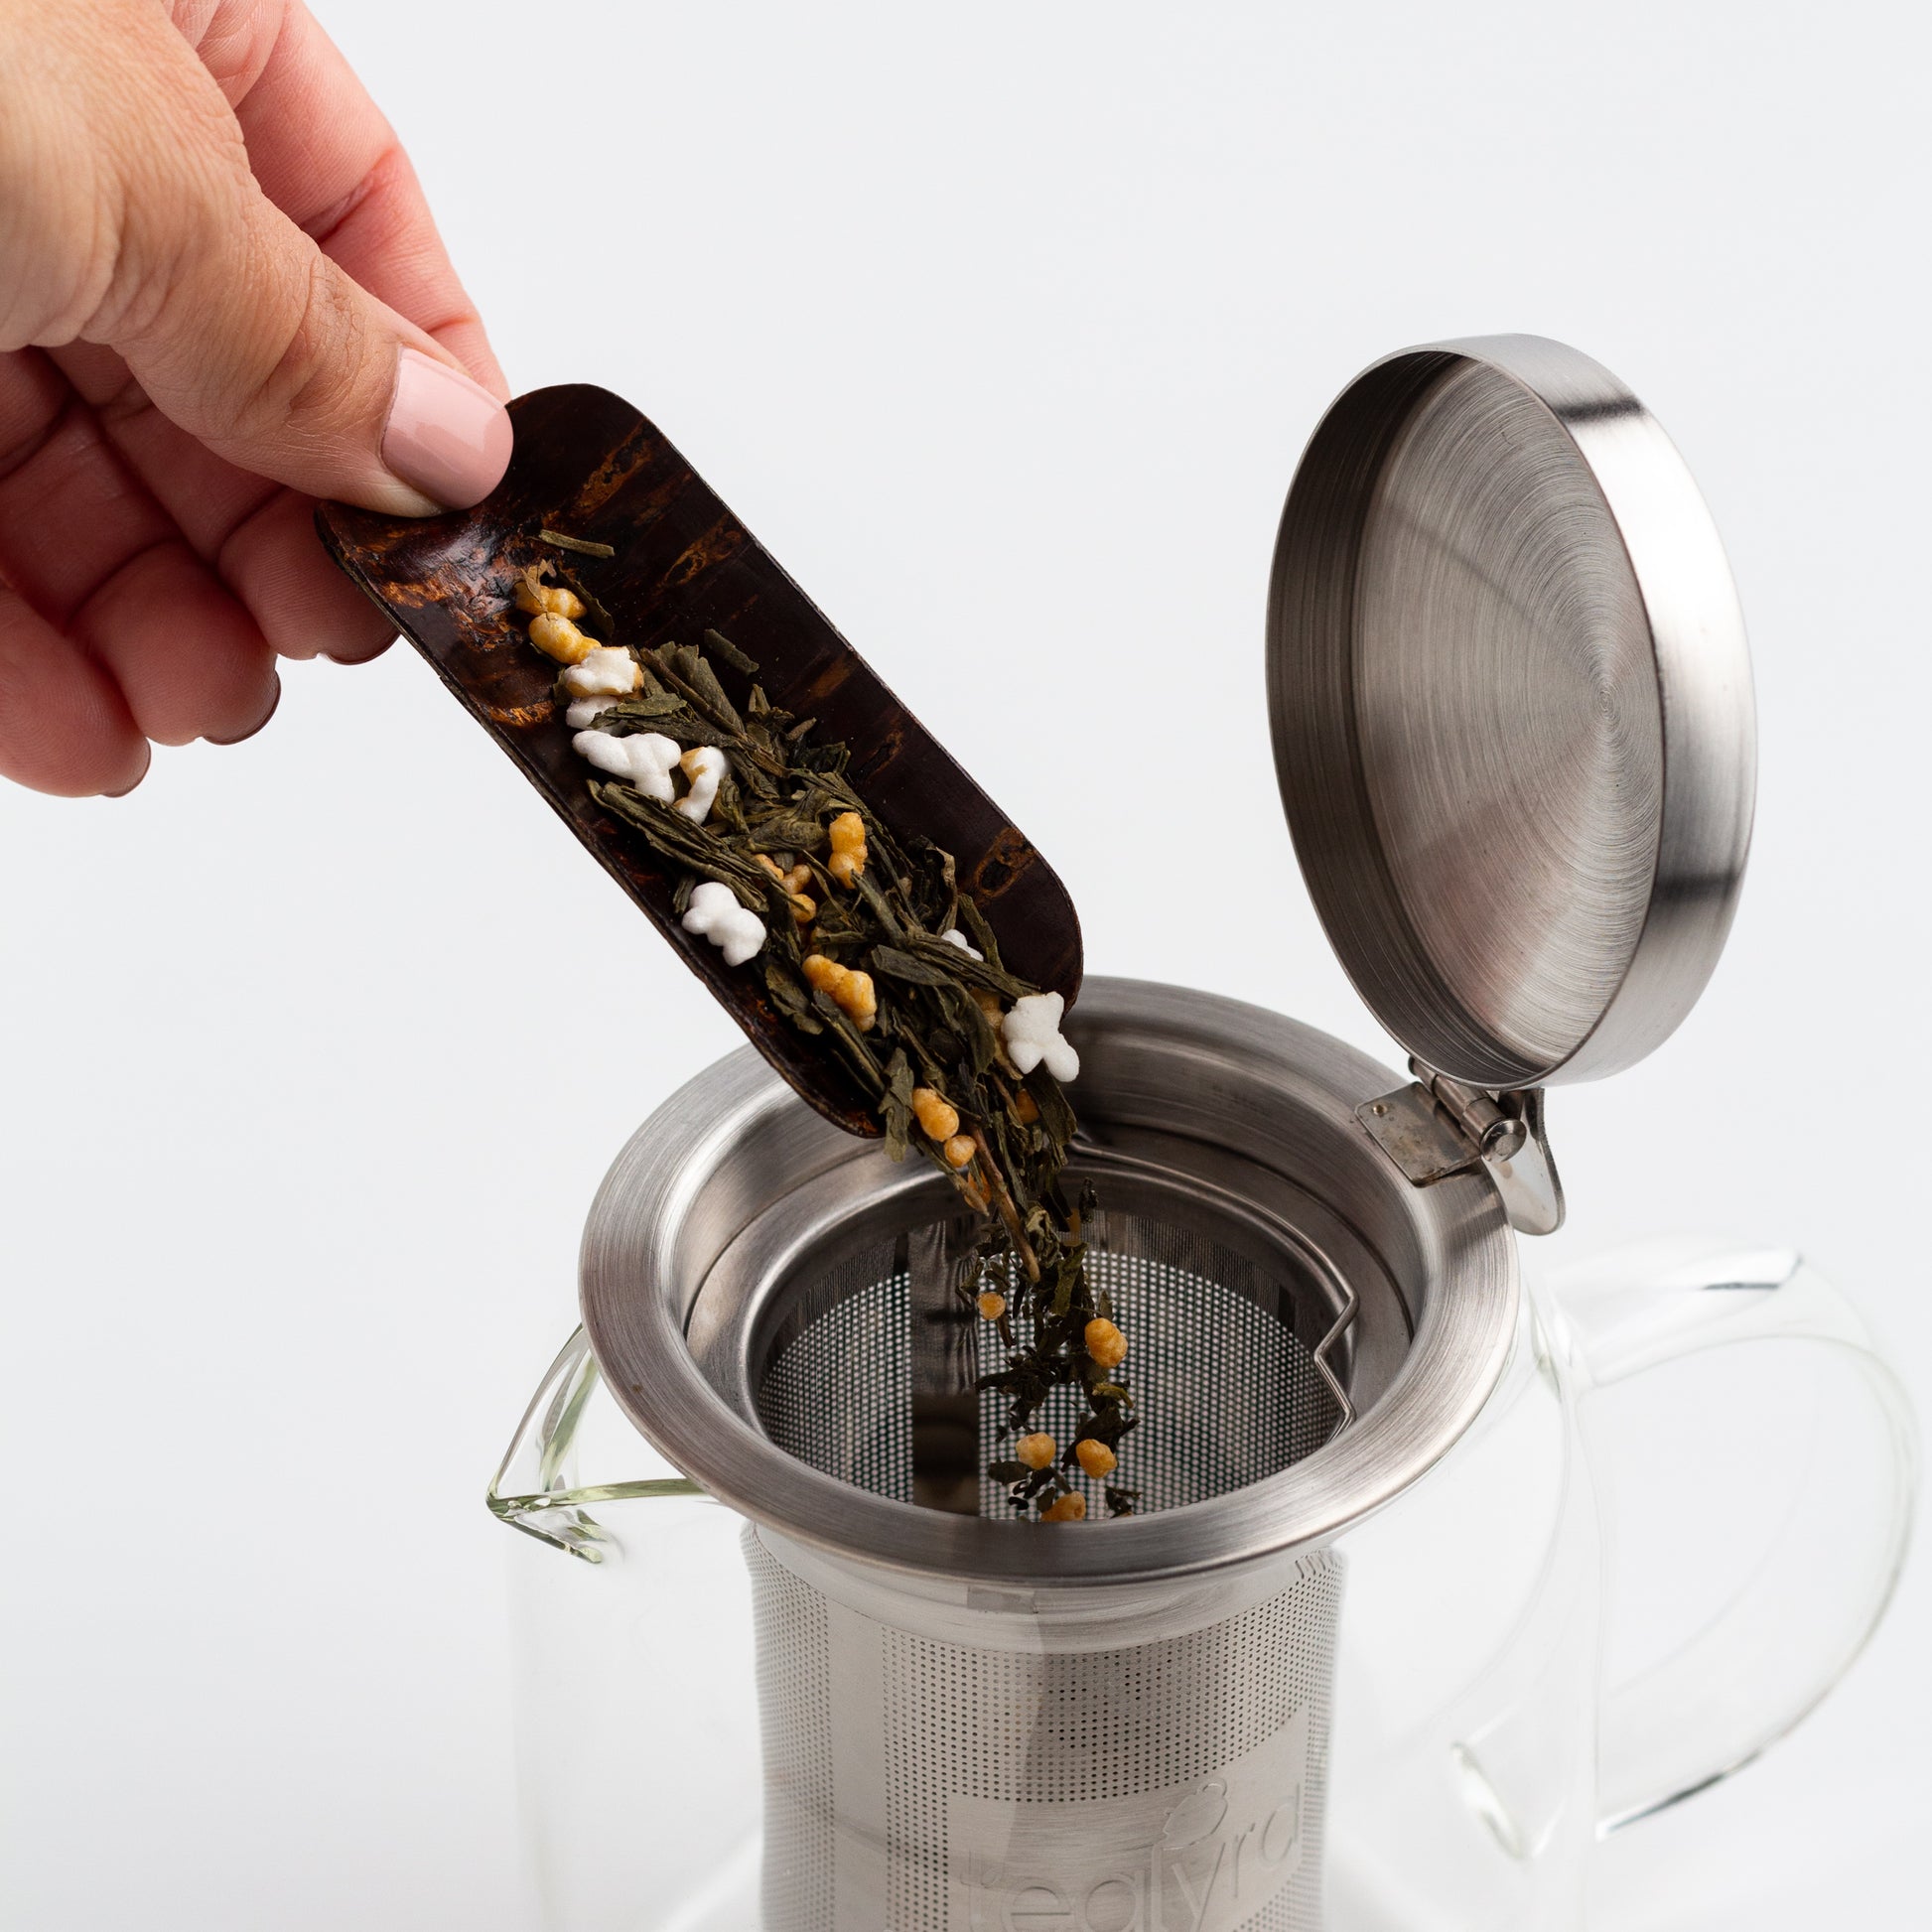 A hand shown pouring Genmaicha green tea leaves from a cherry wood tea scoop into a stainless steel infuser in a glass teapot.